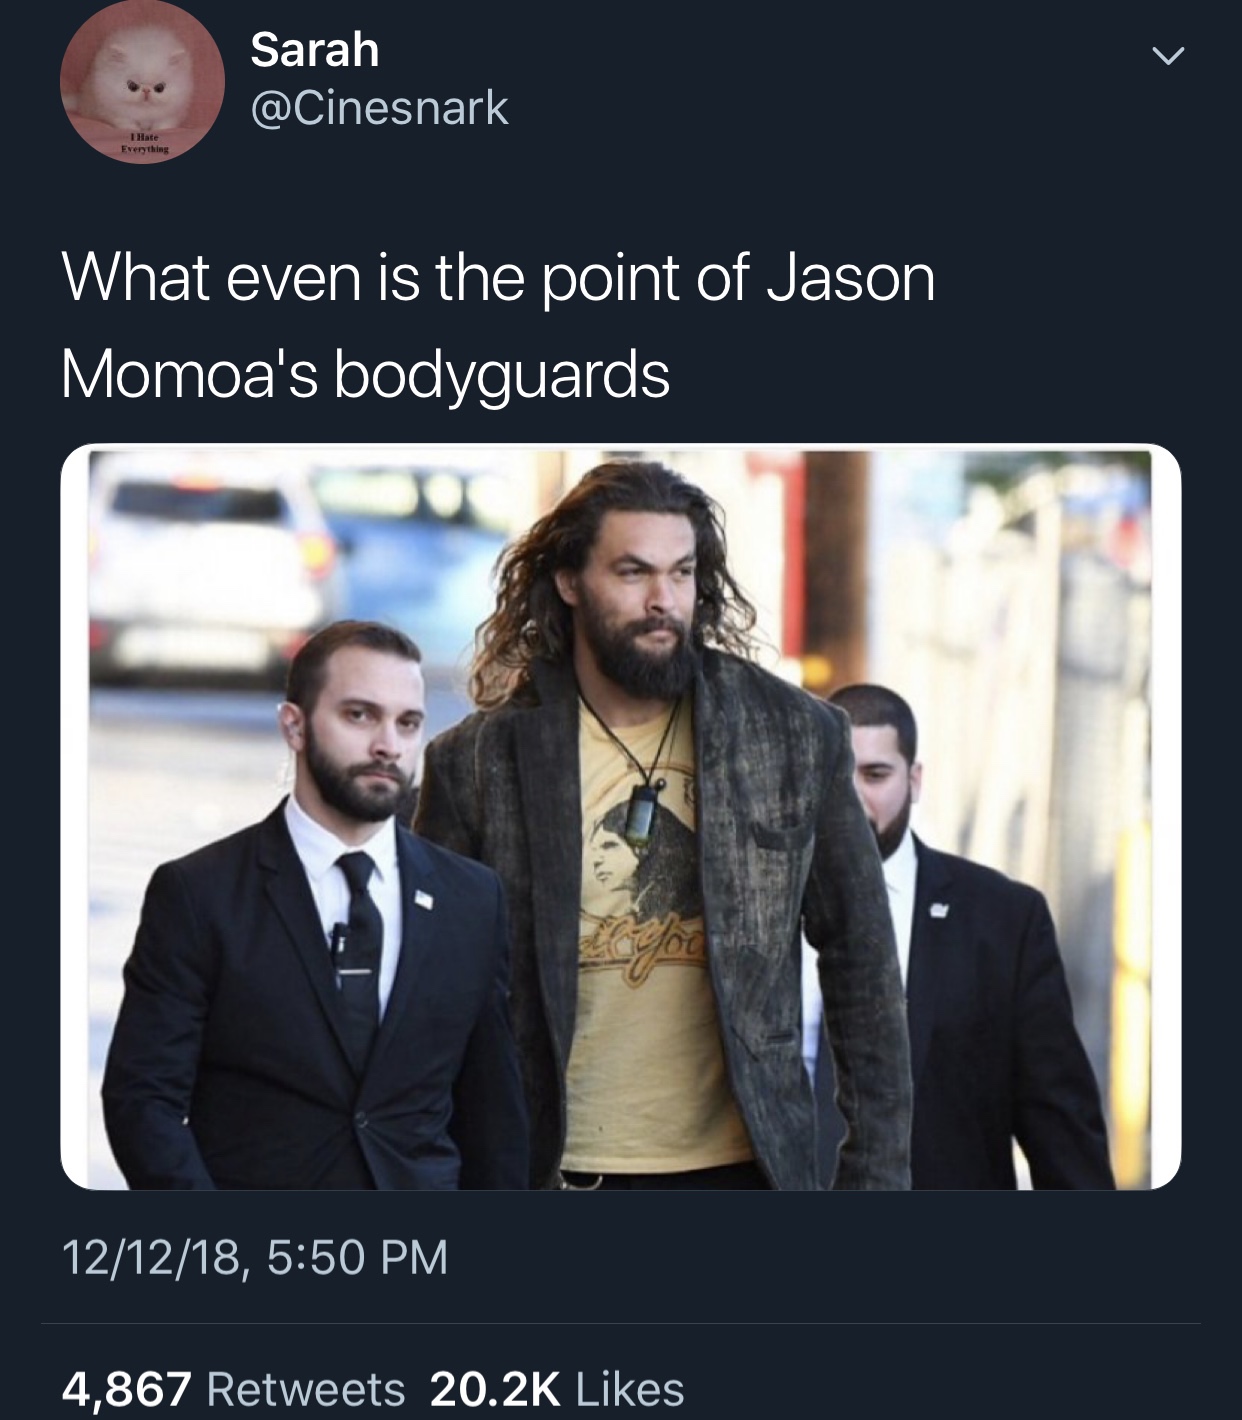 jason momoa mini boss - Sarah Hace Everything What even is the point of Jason Momoa's bodyguards 121218, 4,867